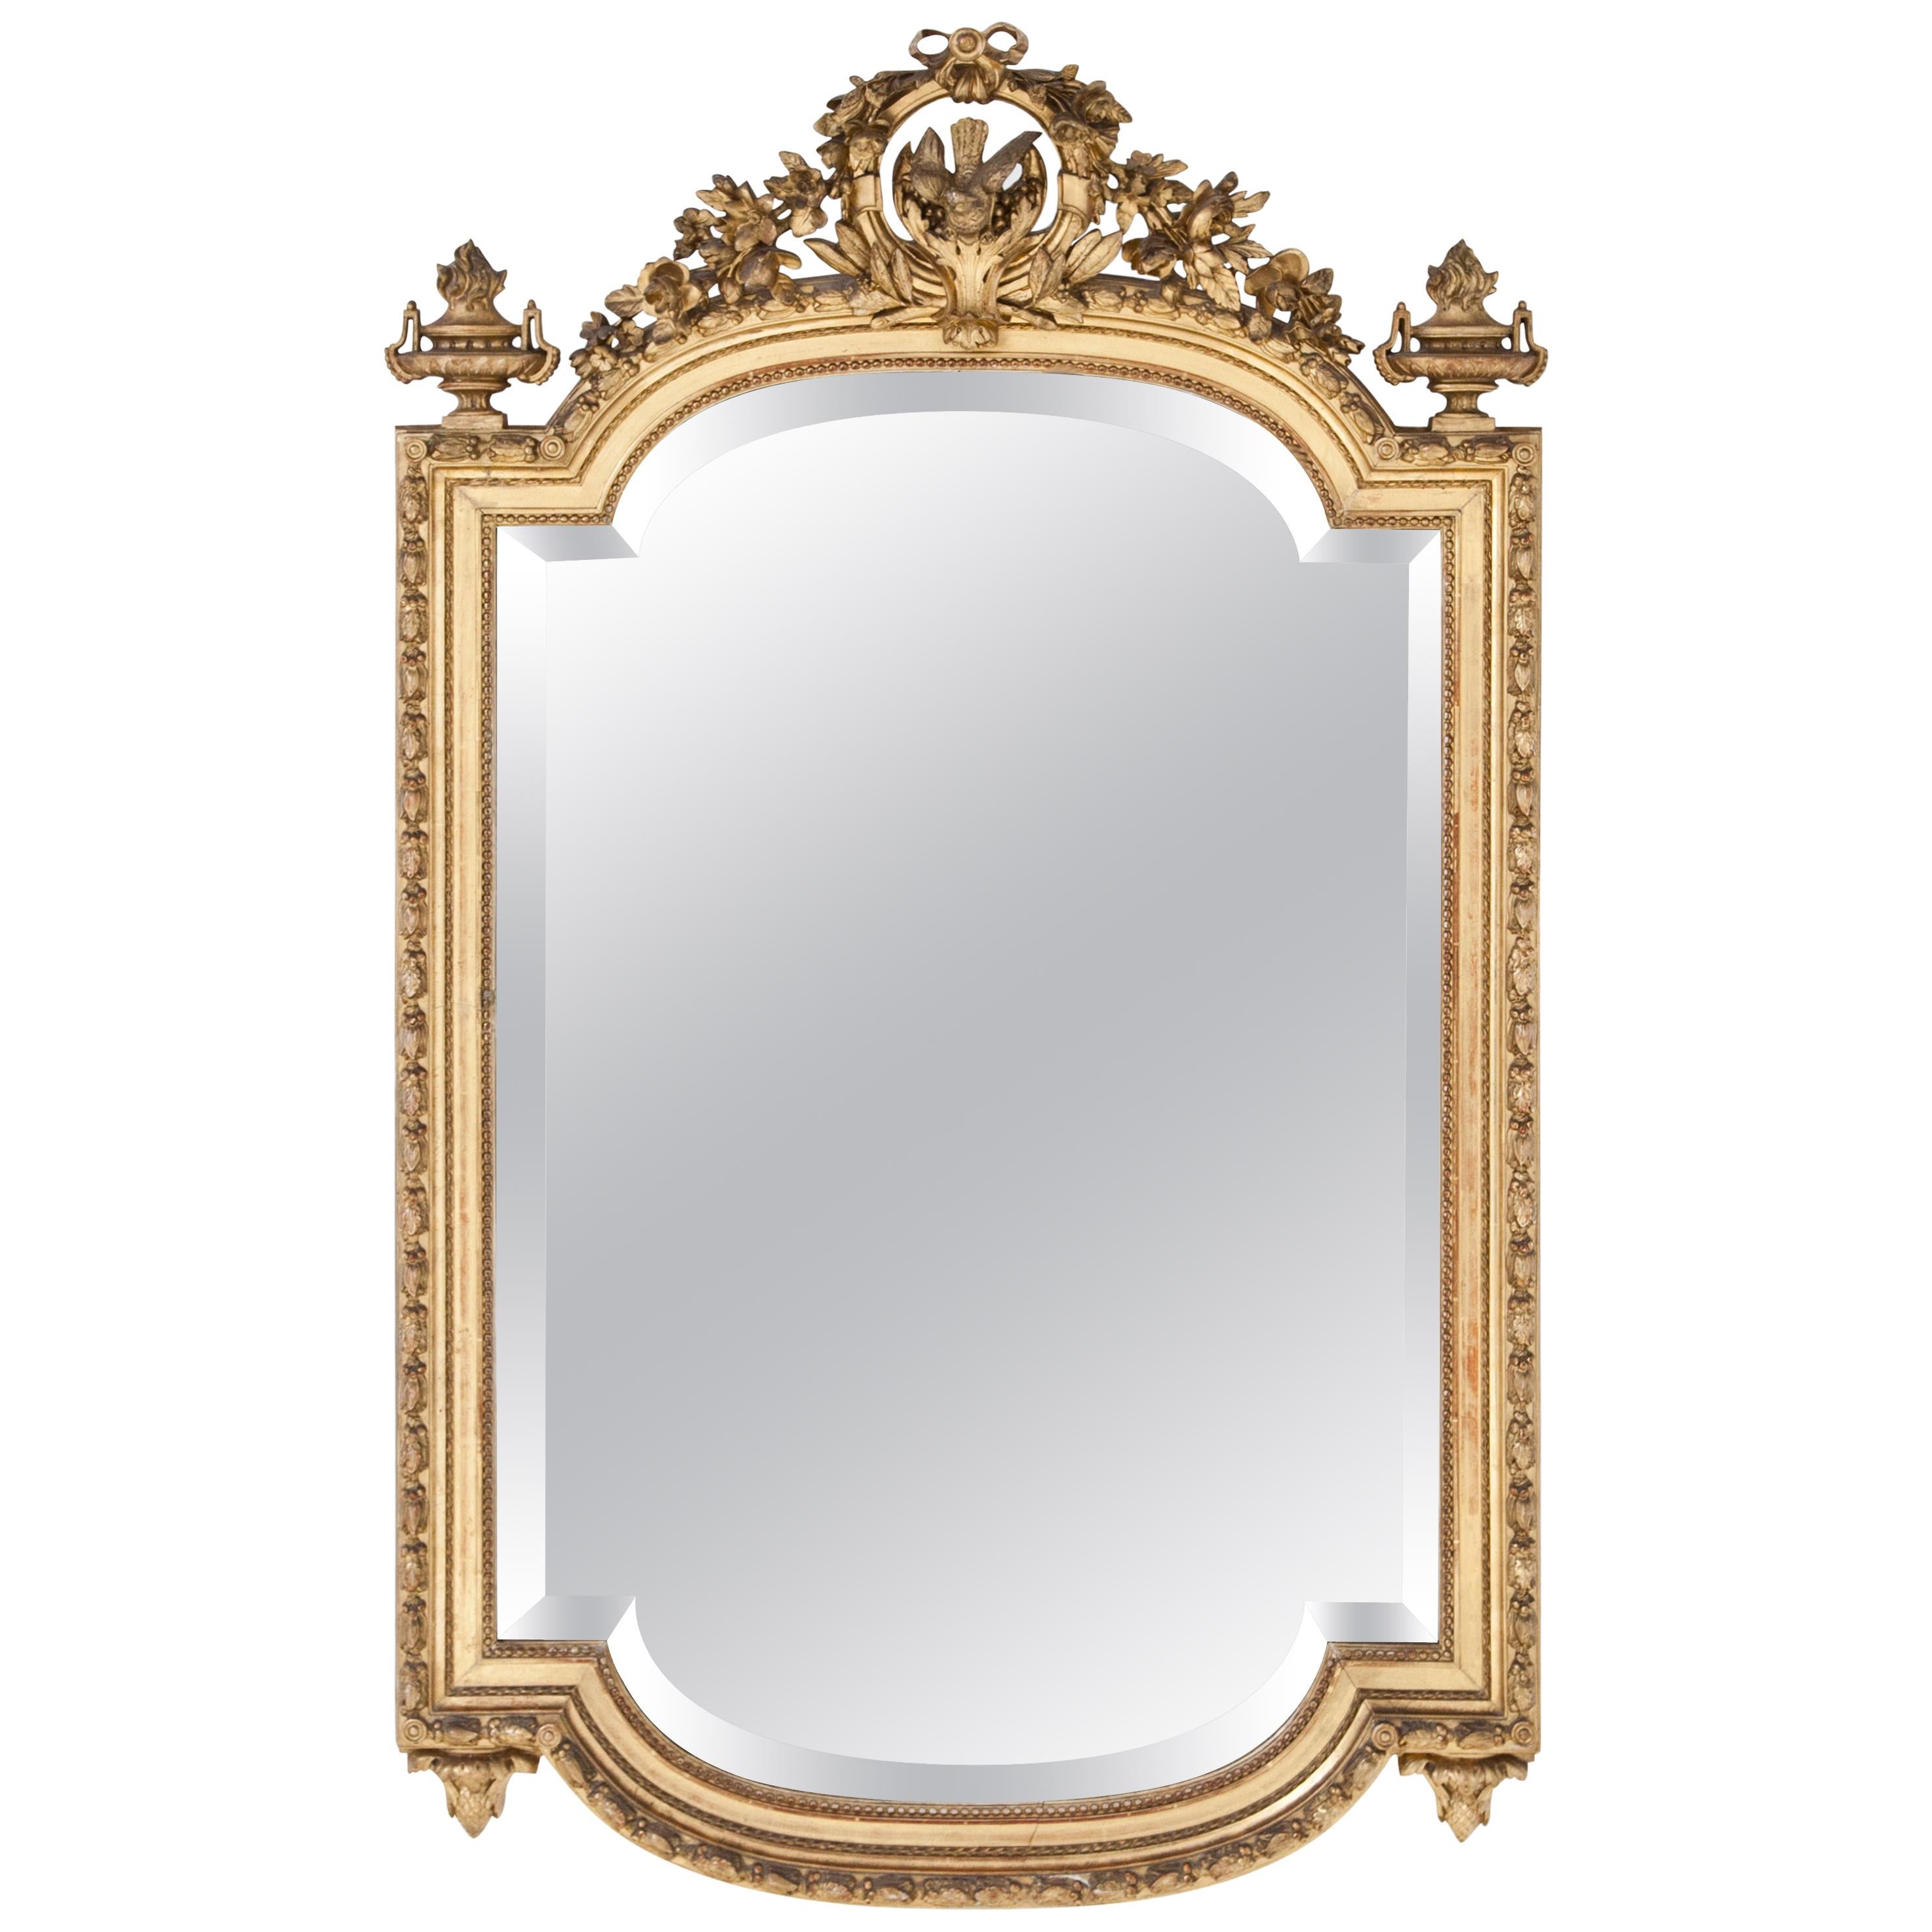 Louis Seize-Style Wall Mirror, Second Half of the 19th Century